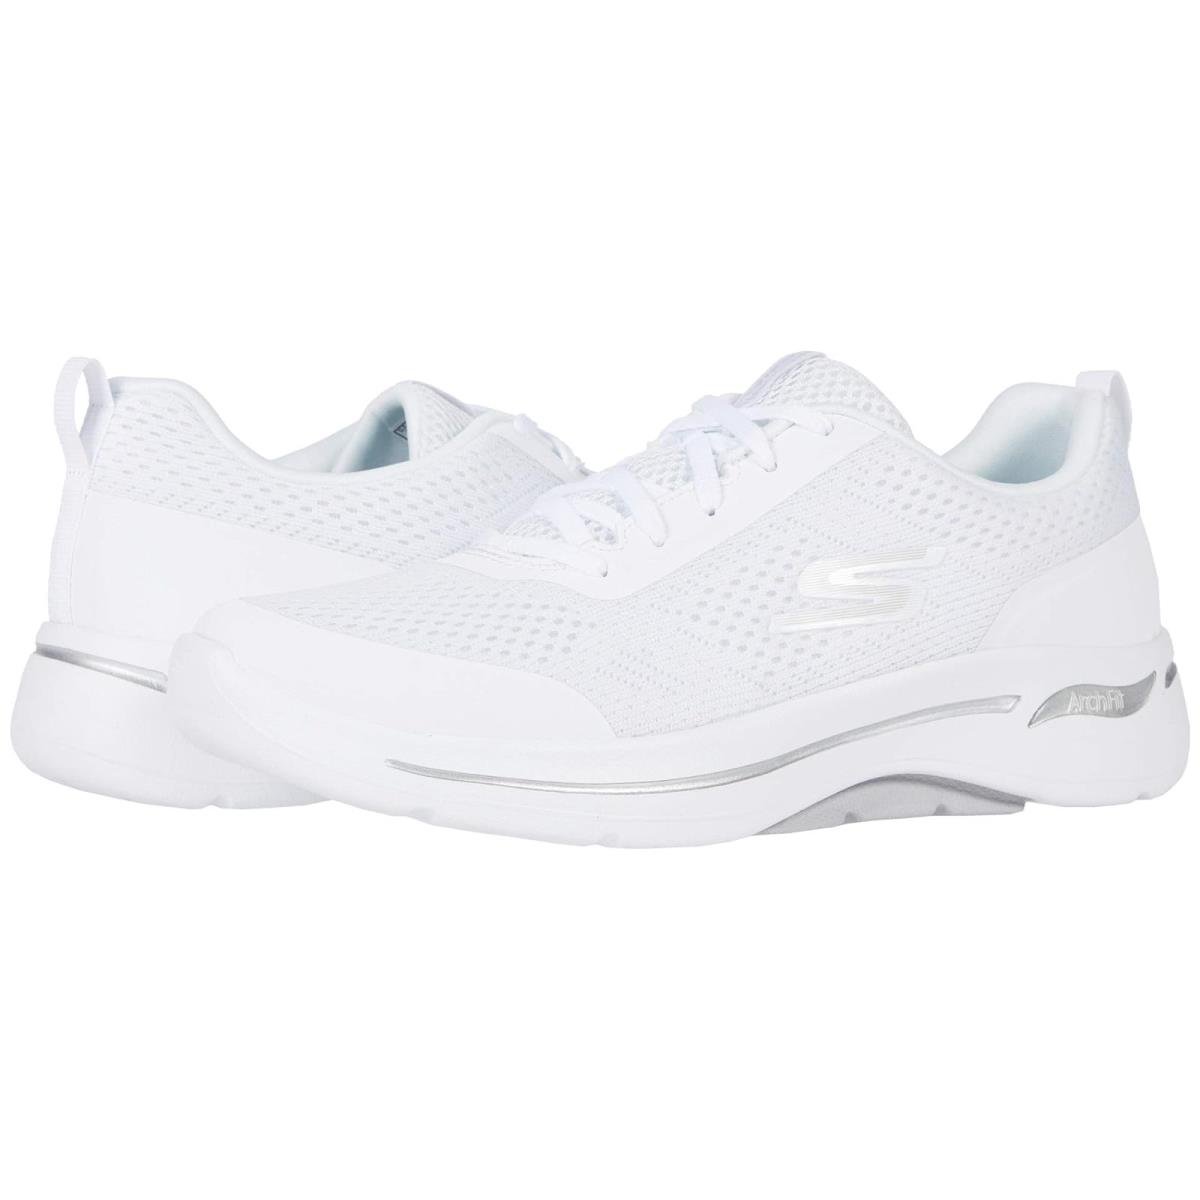 Woman`s Shoes Skechers Performance Go Walk Arch Fit - 124404 White/Silver